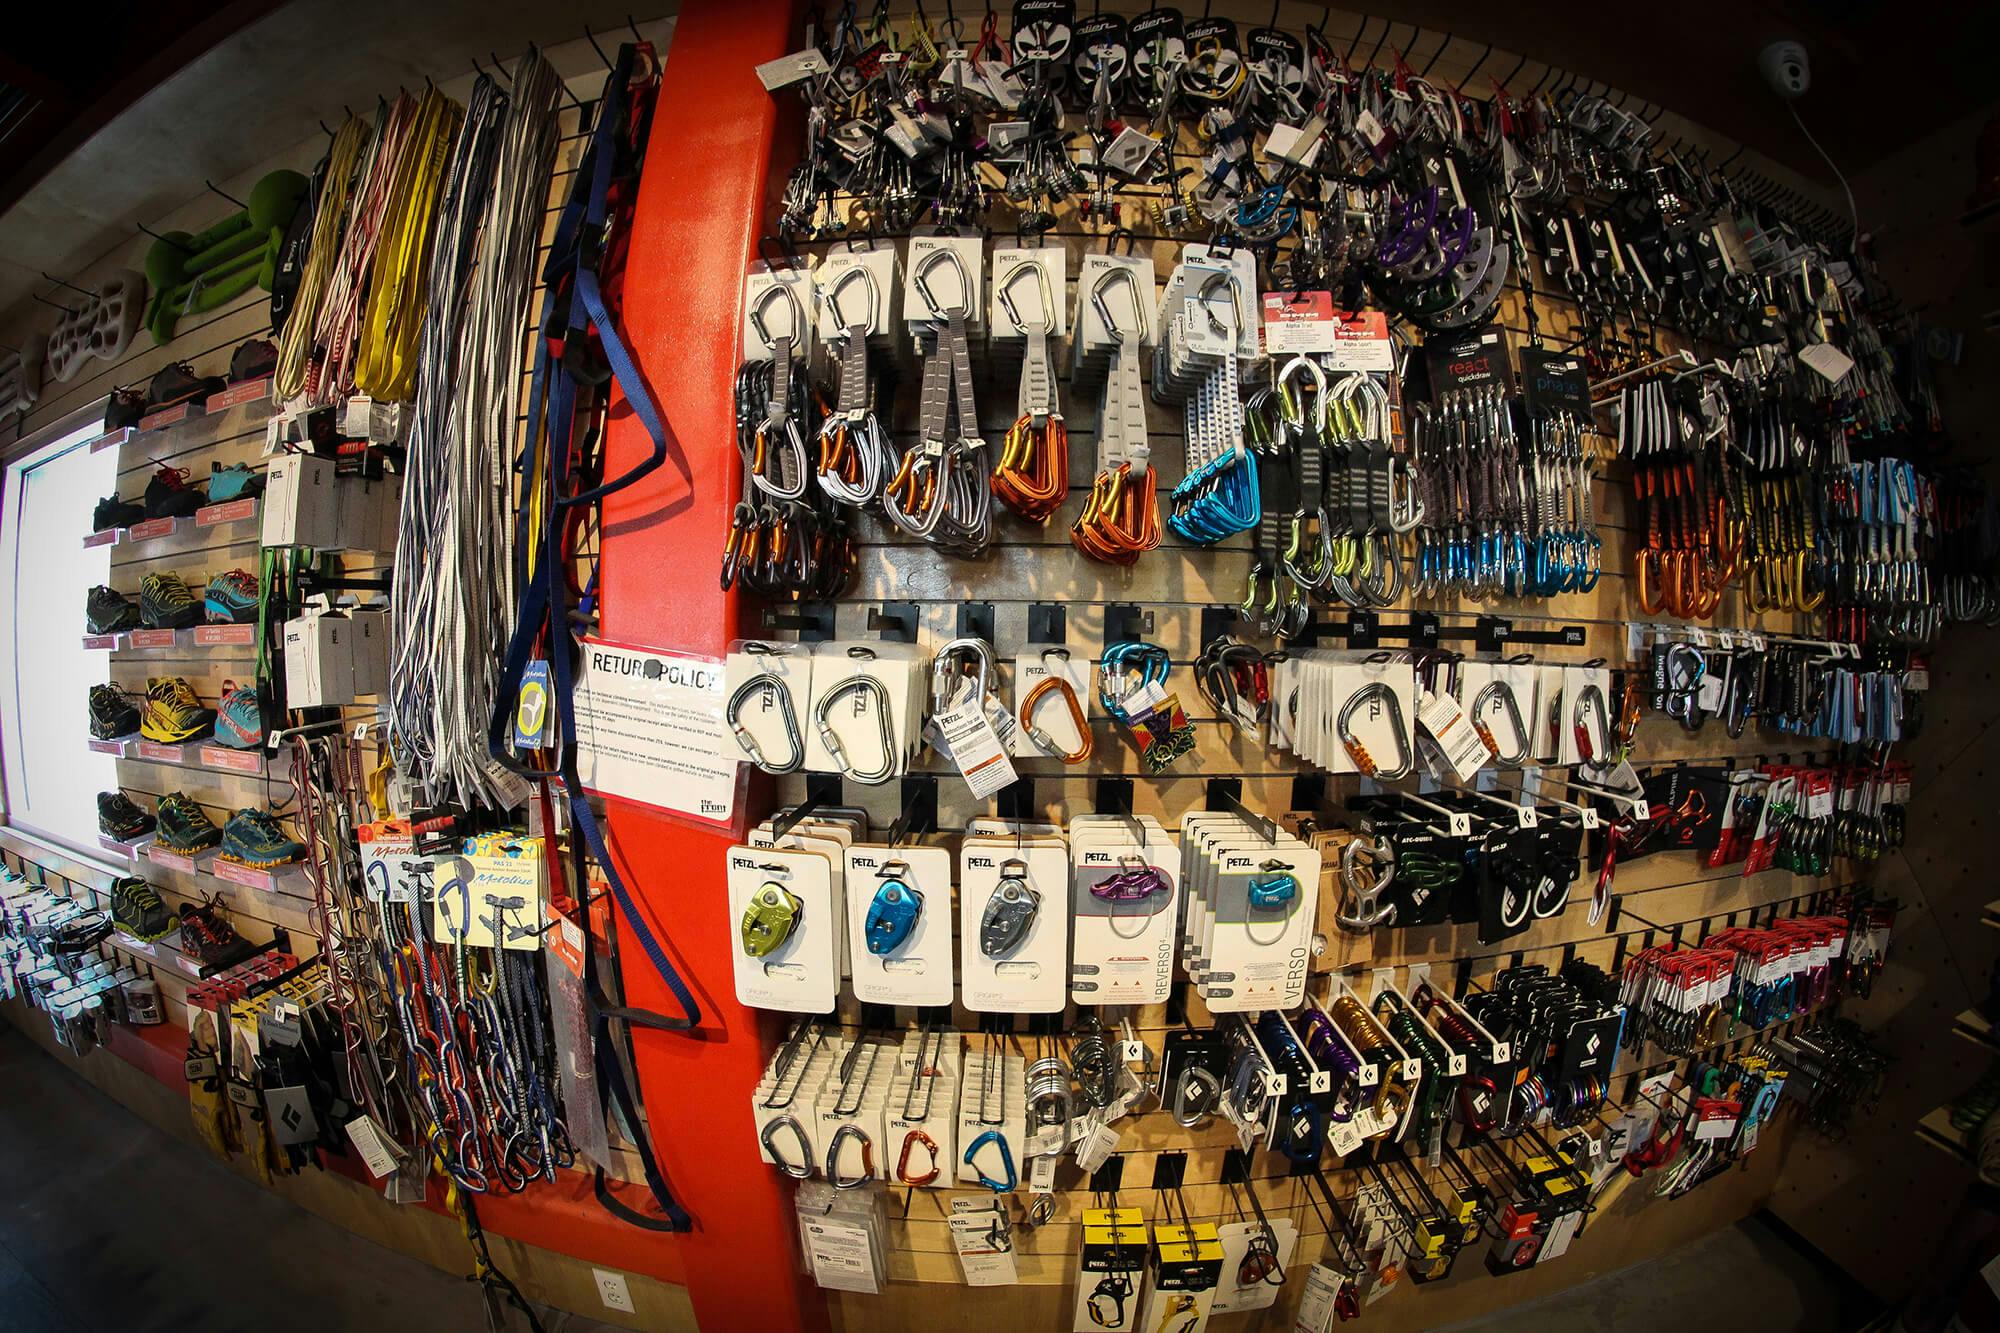 Climbing hardware and other climbing supplies available at Proxy Climbing